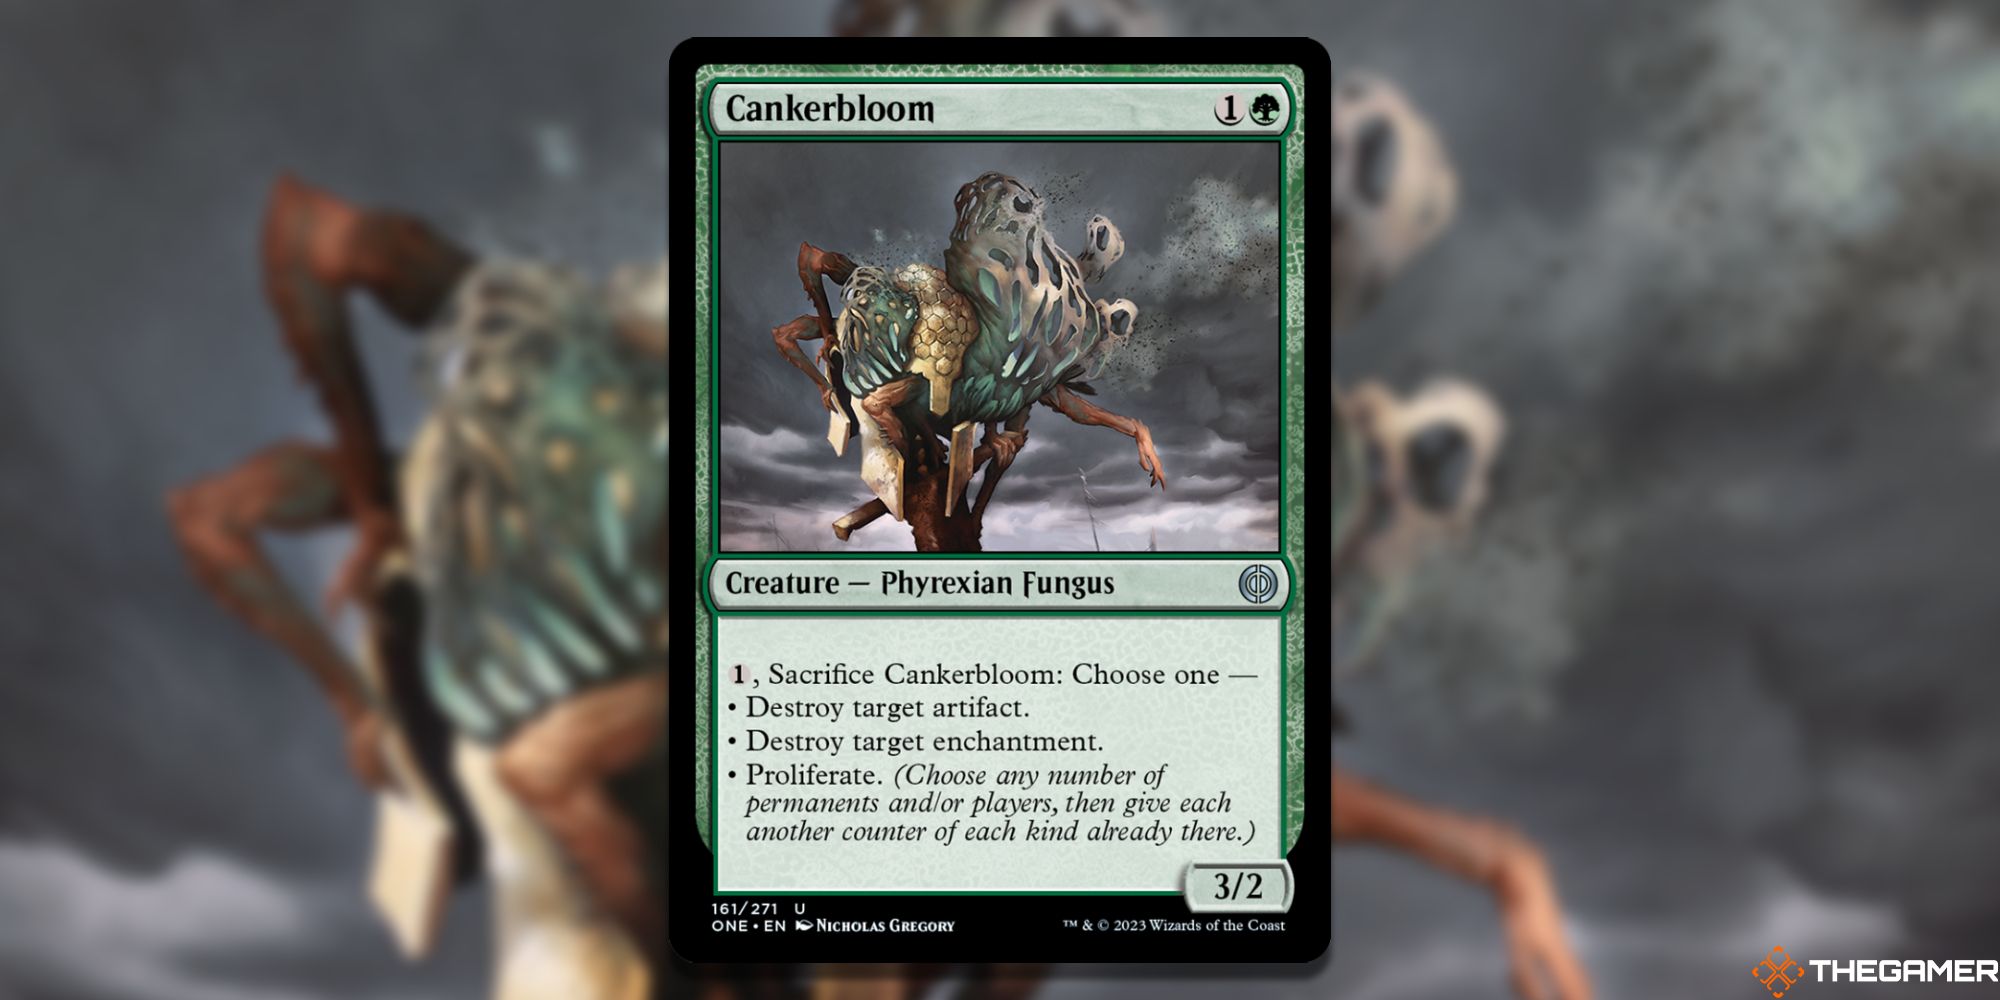 The card Cankerbloom from Magic: The Gathering.